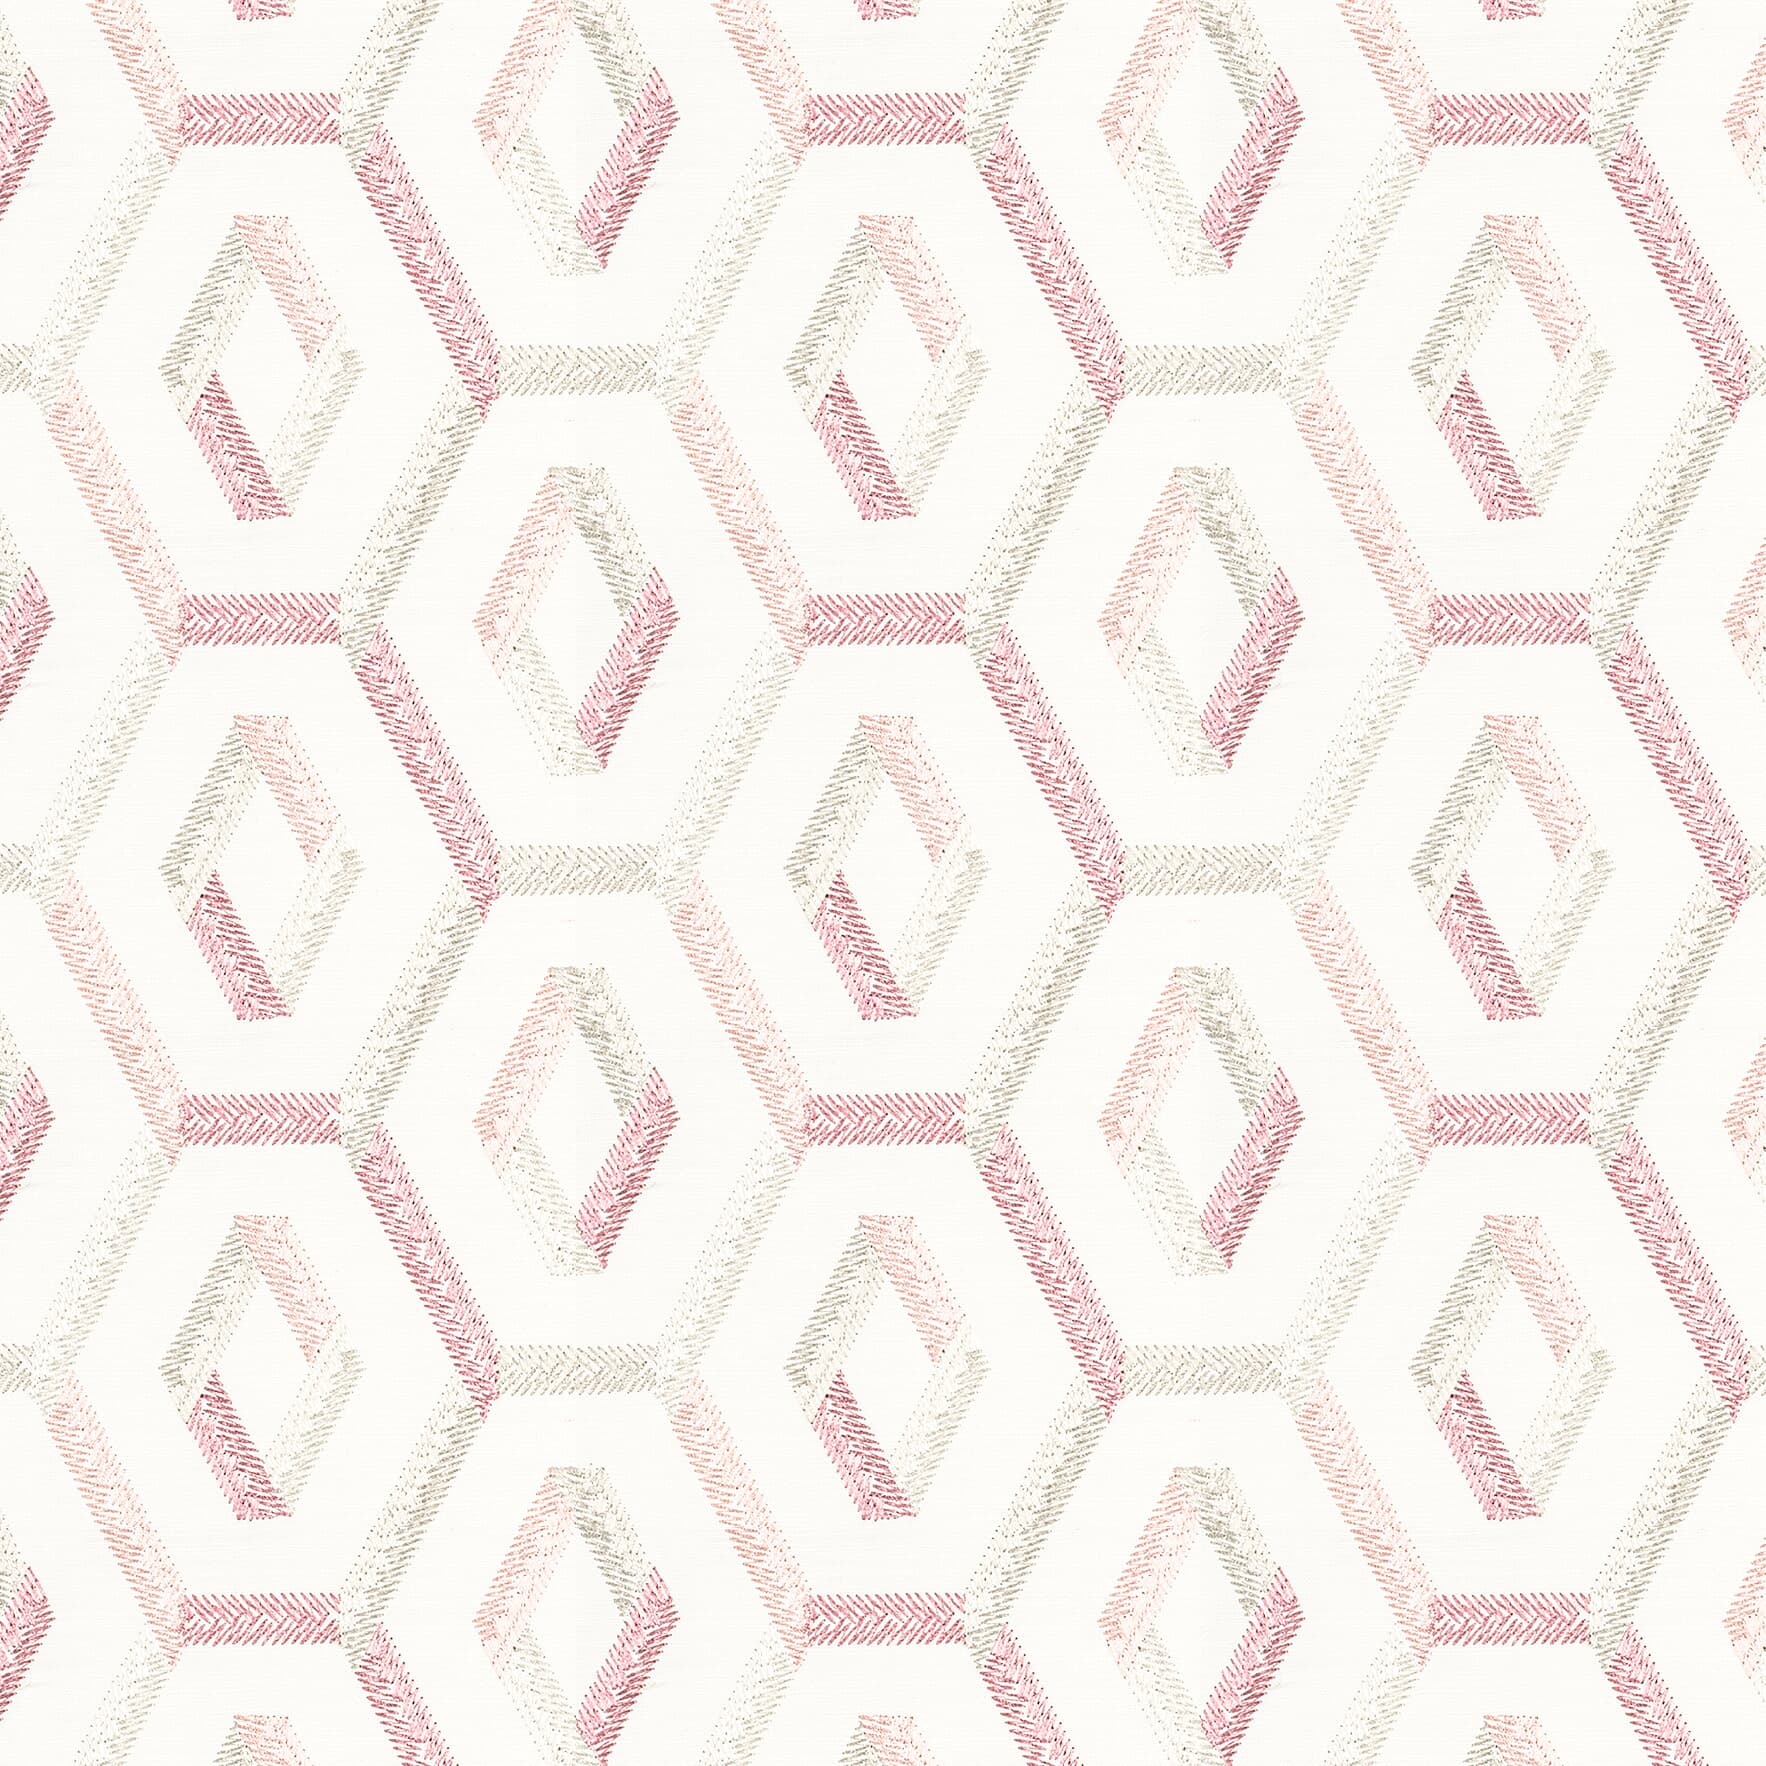 Chuckle 3 Tearose by Stout Fabric